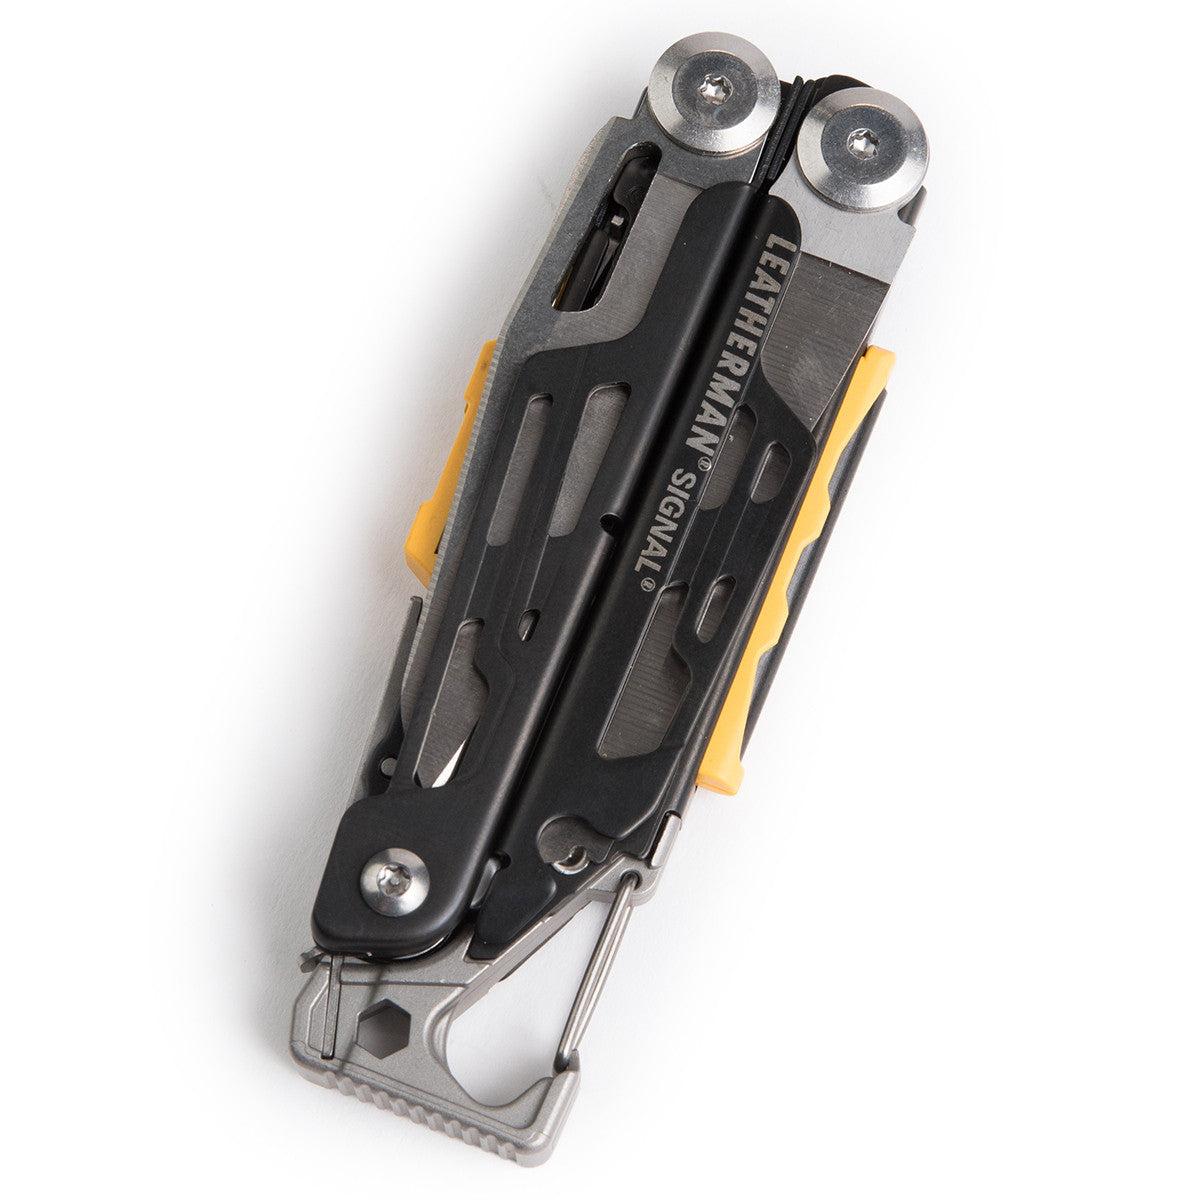 The Leatherman Signal Outdoor Multi-Tool: With A Fire-Starter